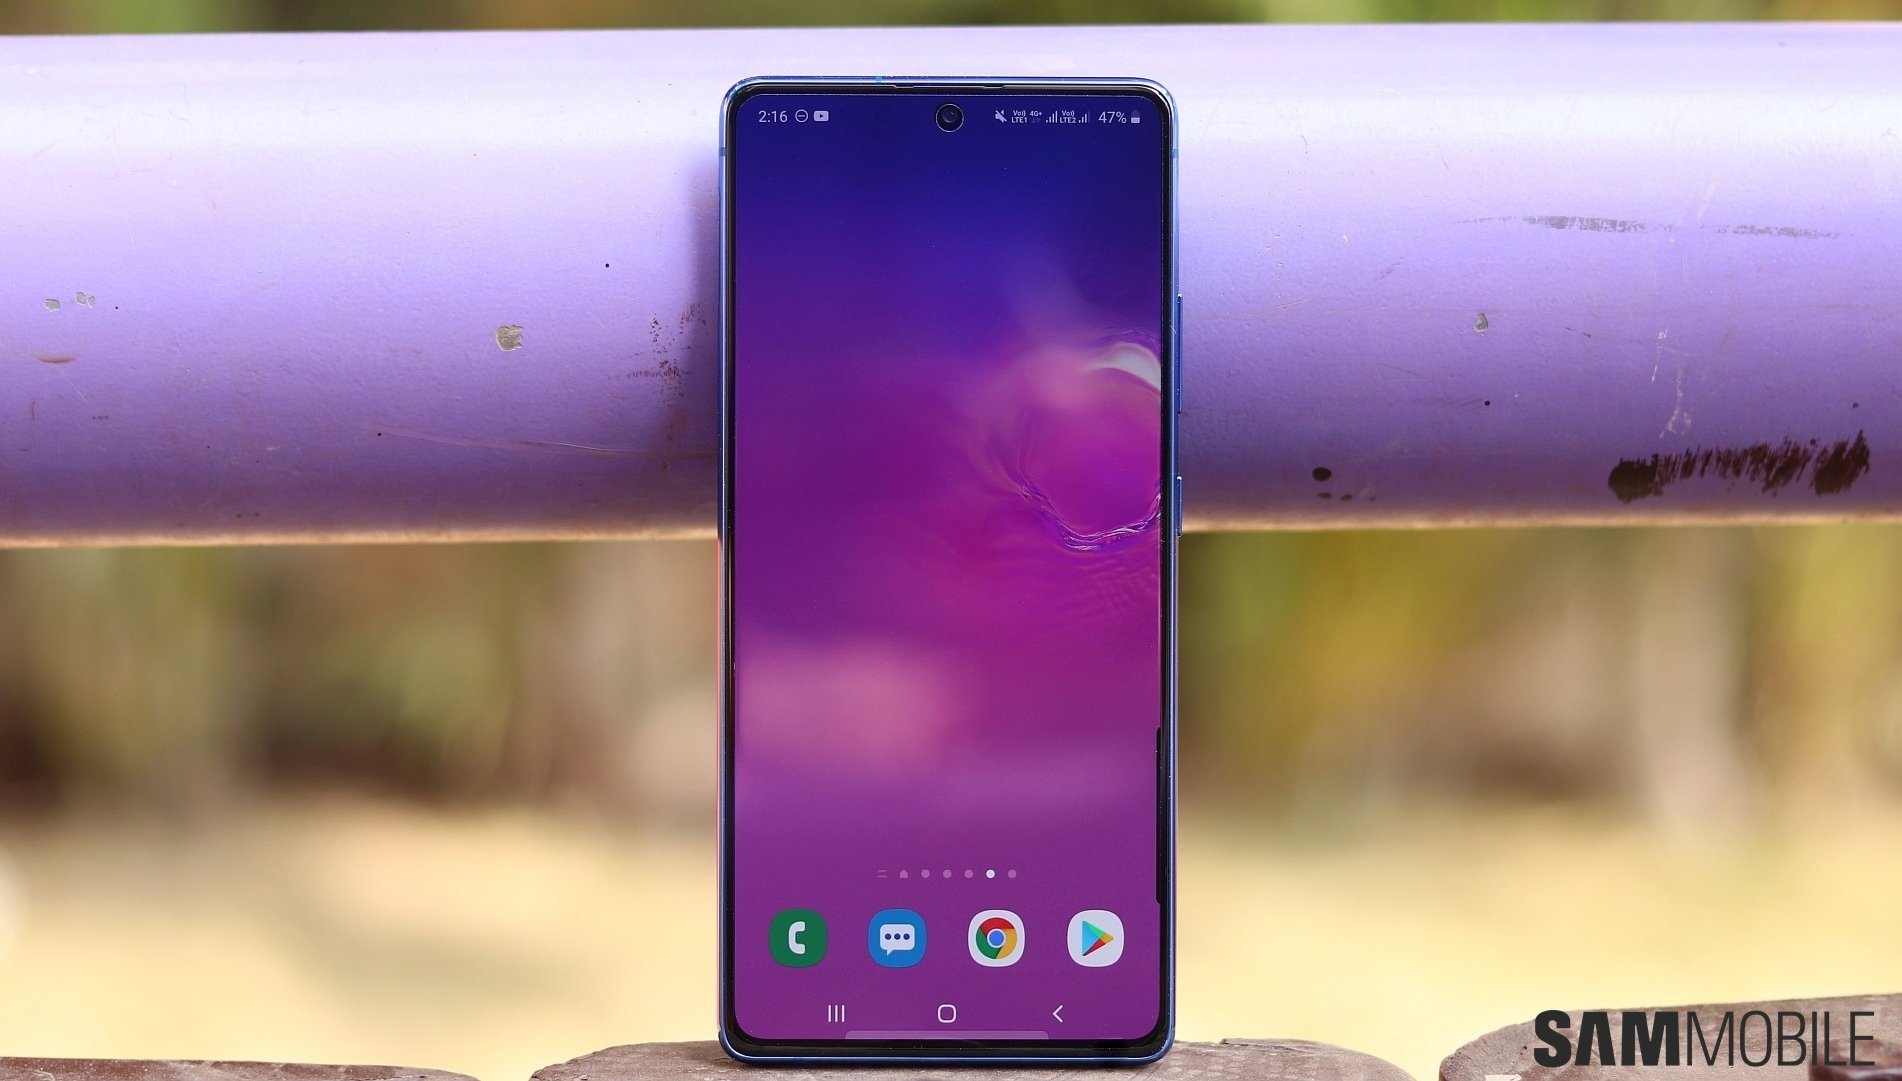 The best Samsung Galaxy S10 Plus cases: Here are the best picks in